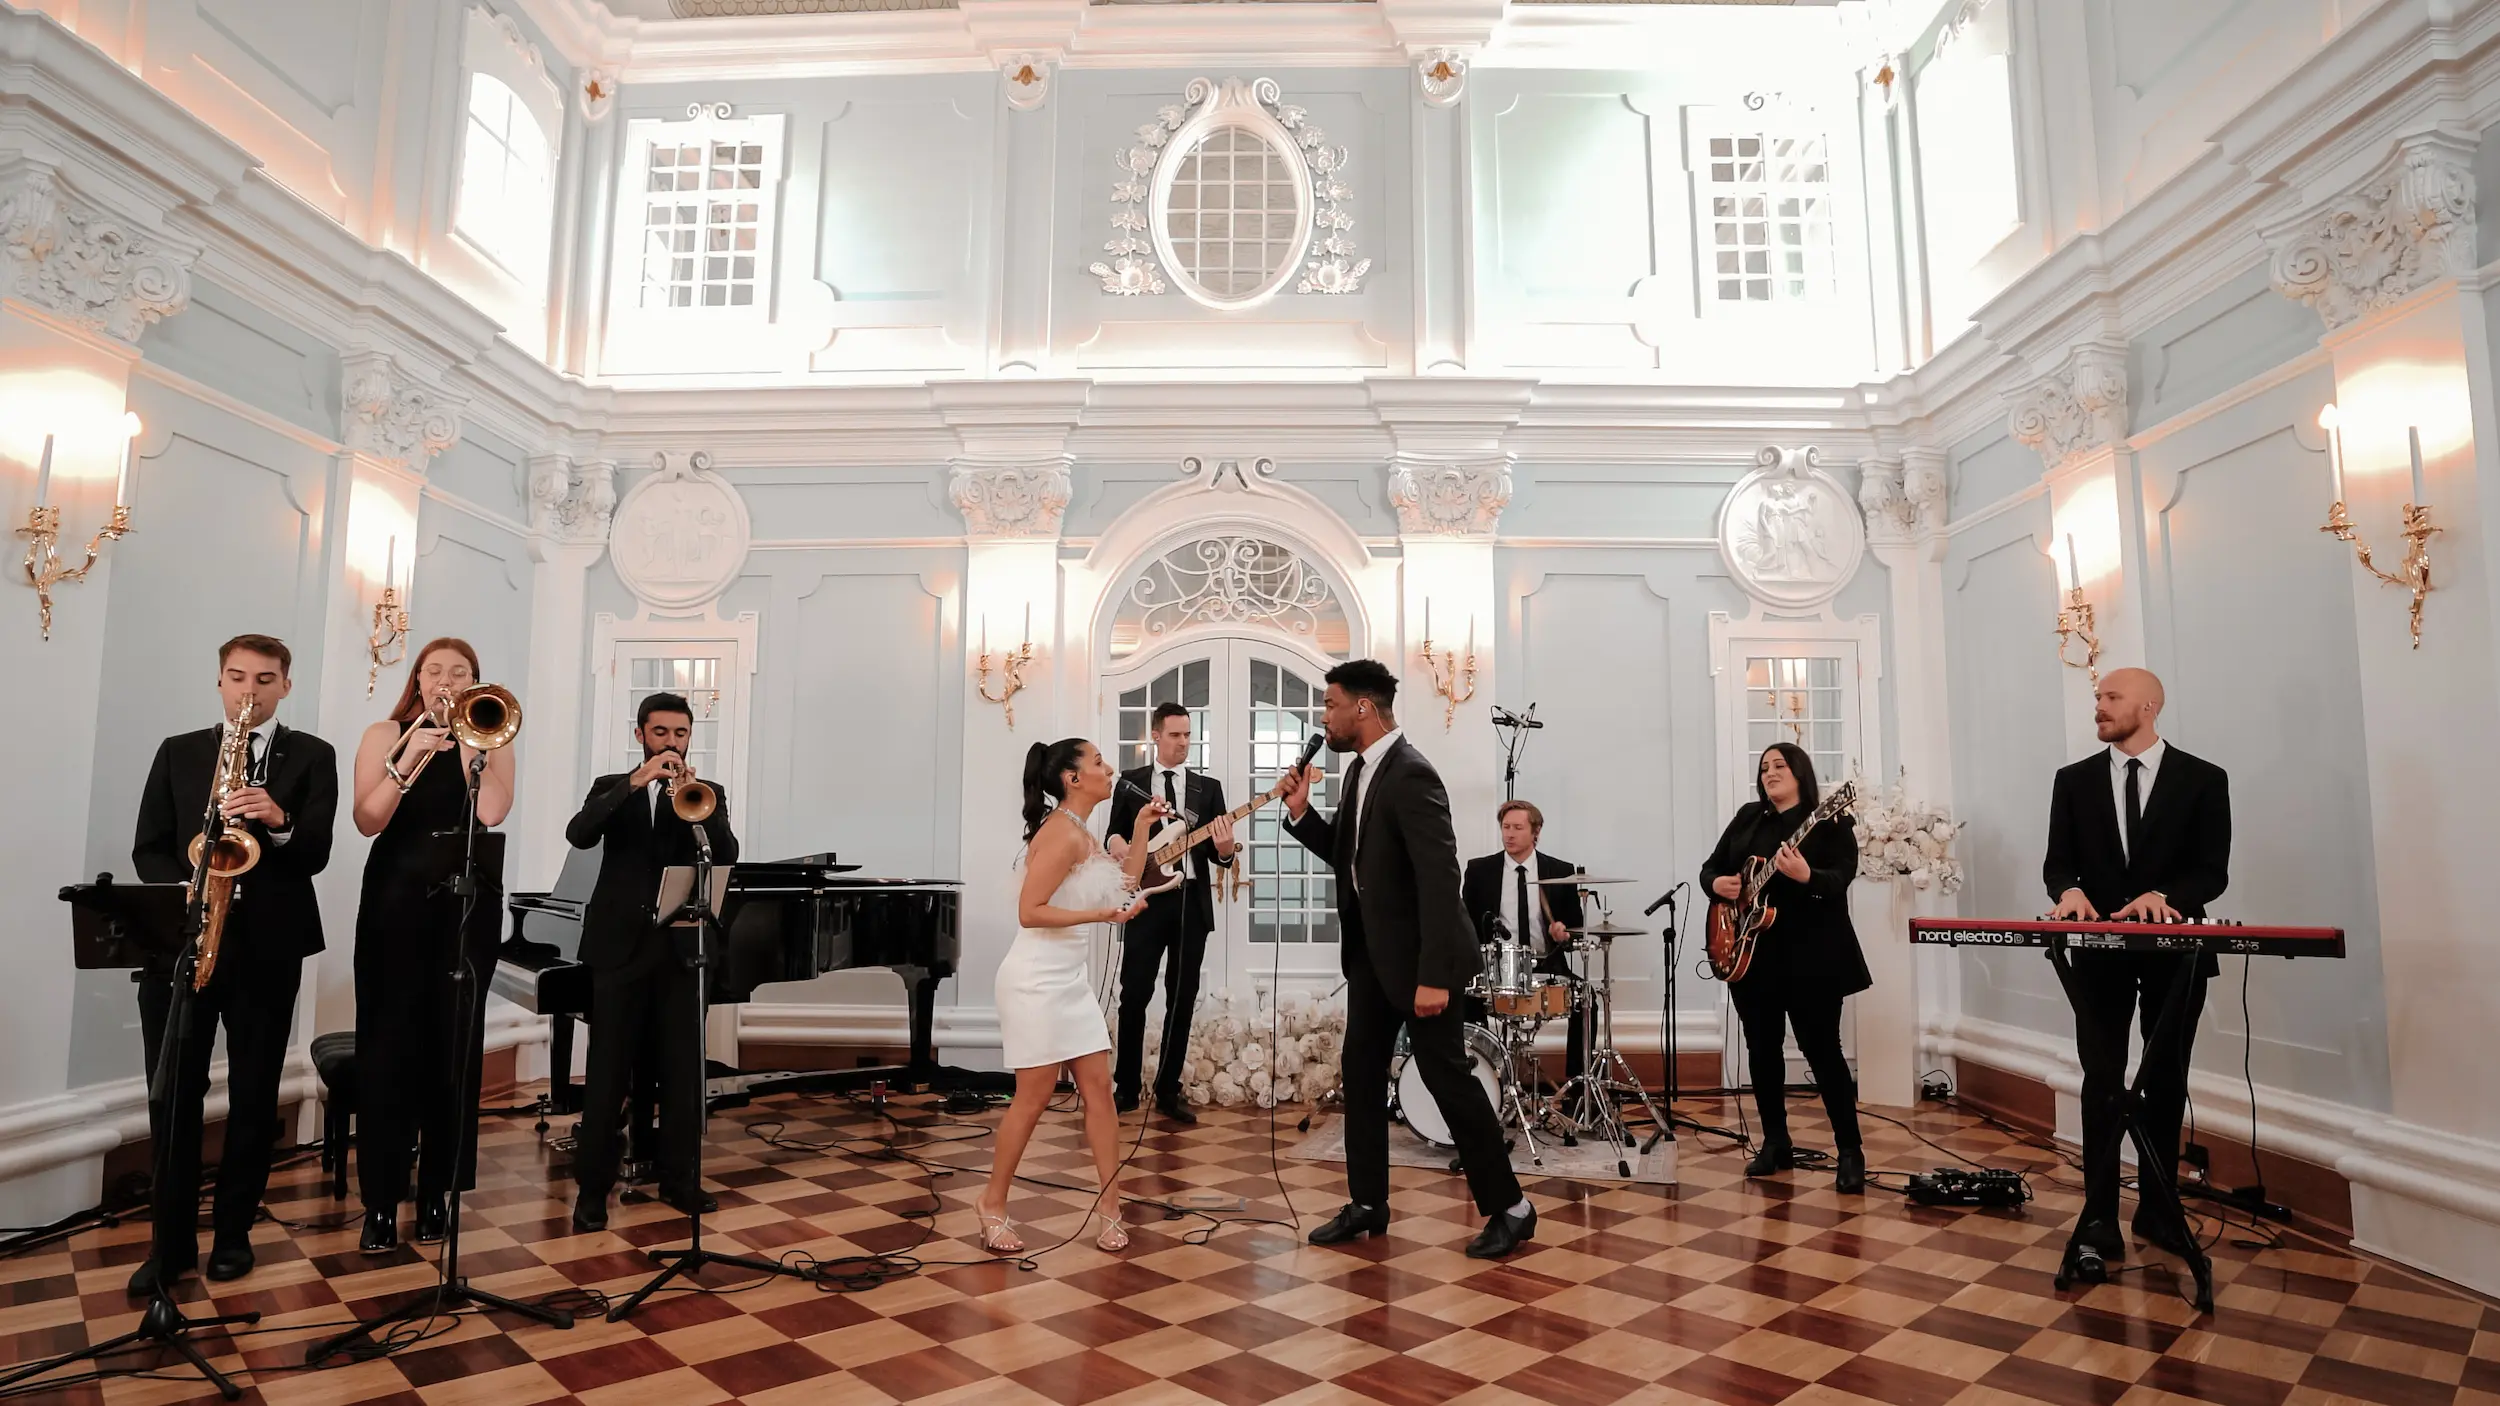 Band of musicians singing in classy hall located in Adelaide, South Australia.